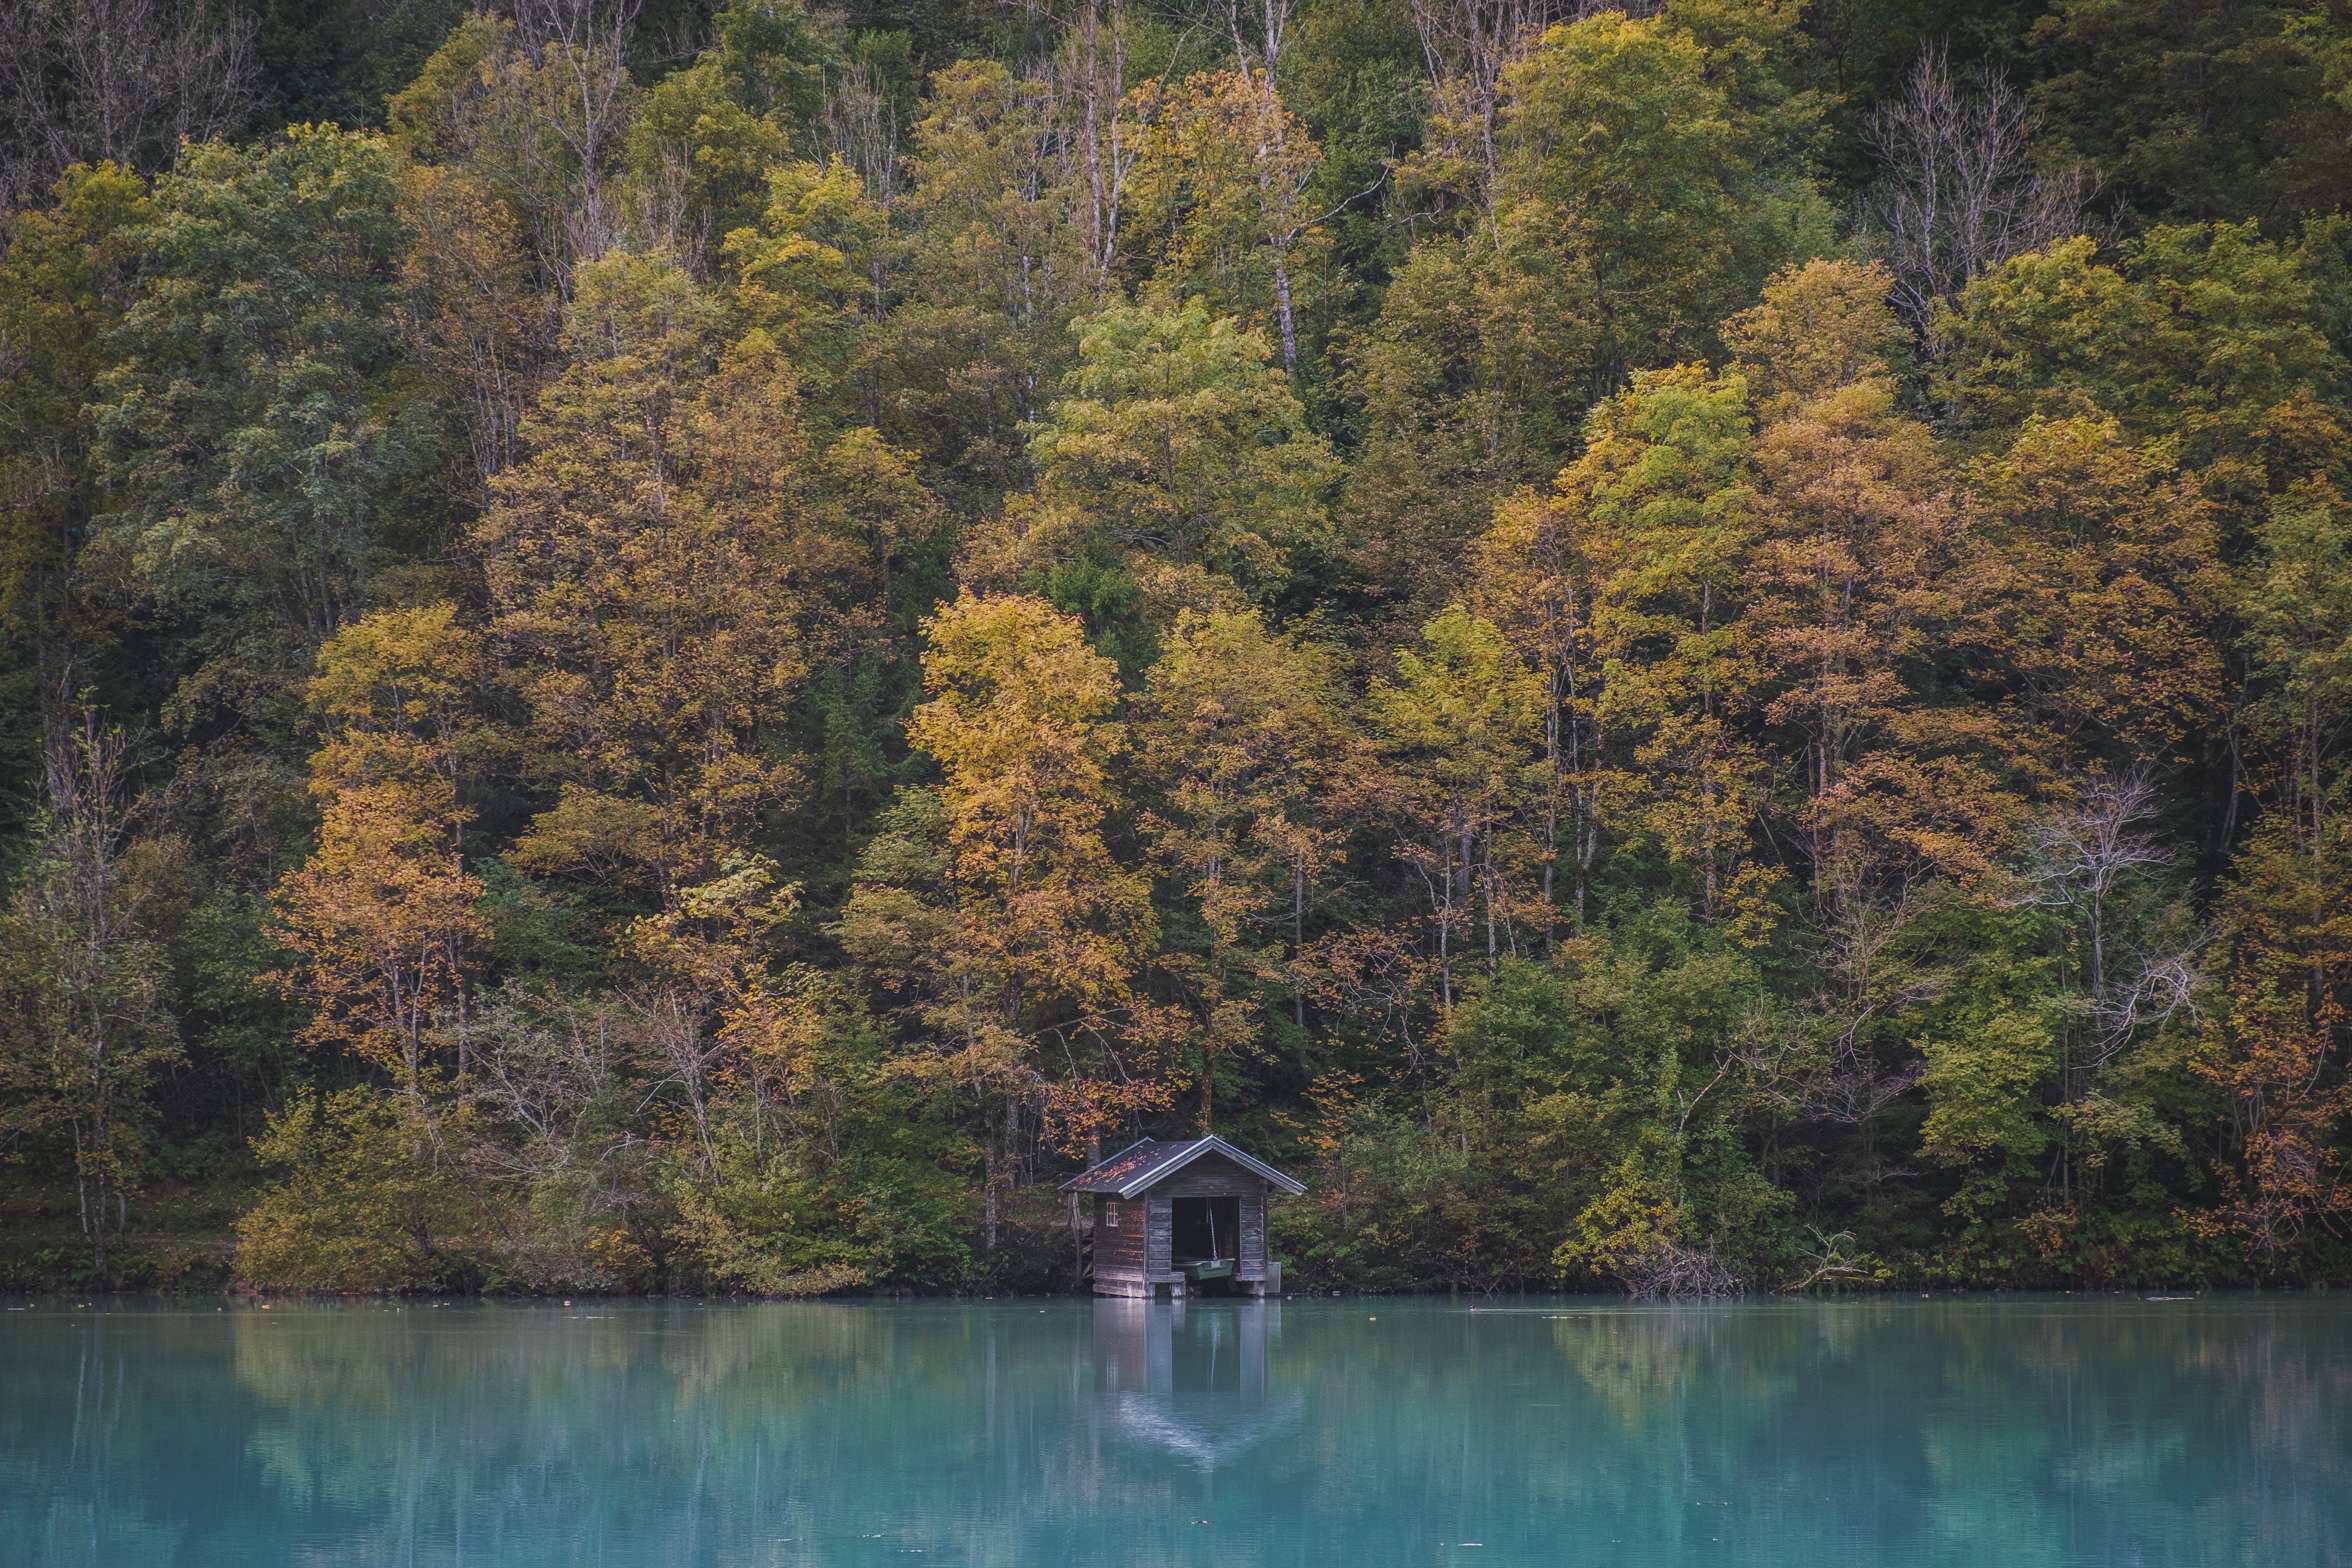 A small wooden boathouse reflects in Klamsee with autumn coloured trees surrounding